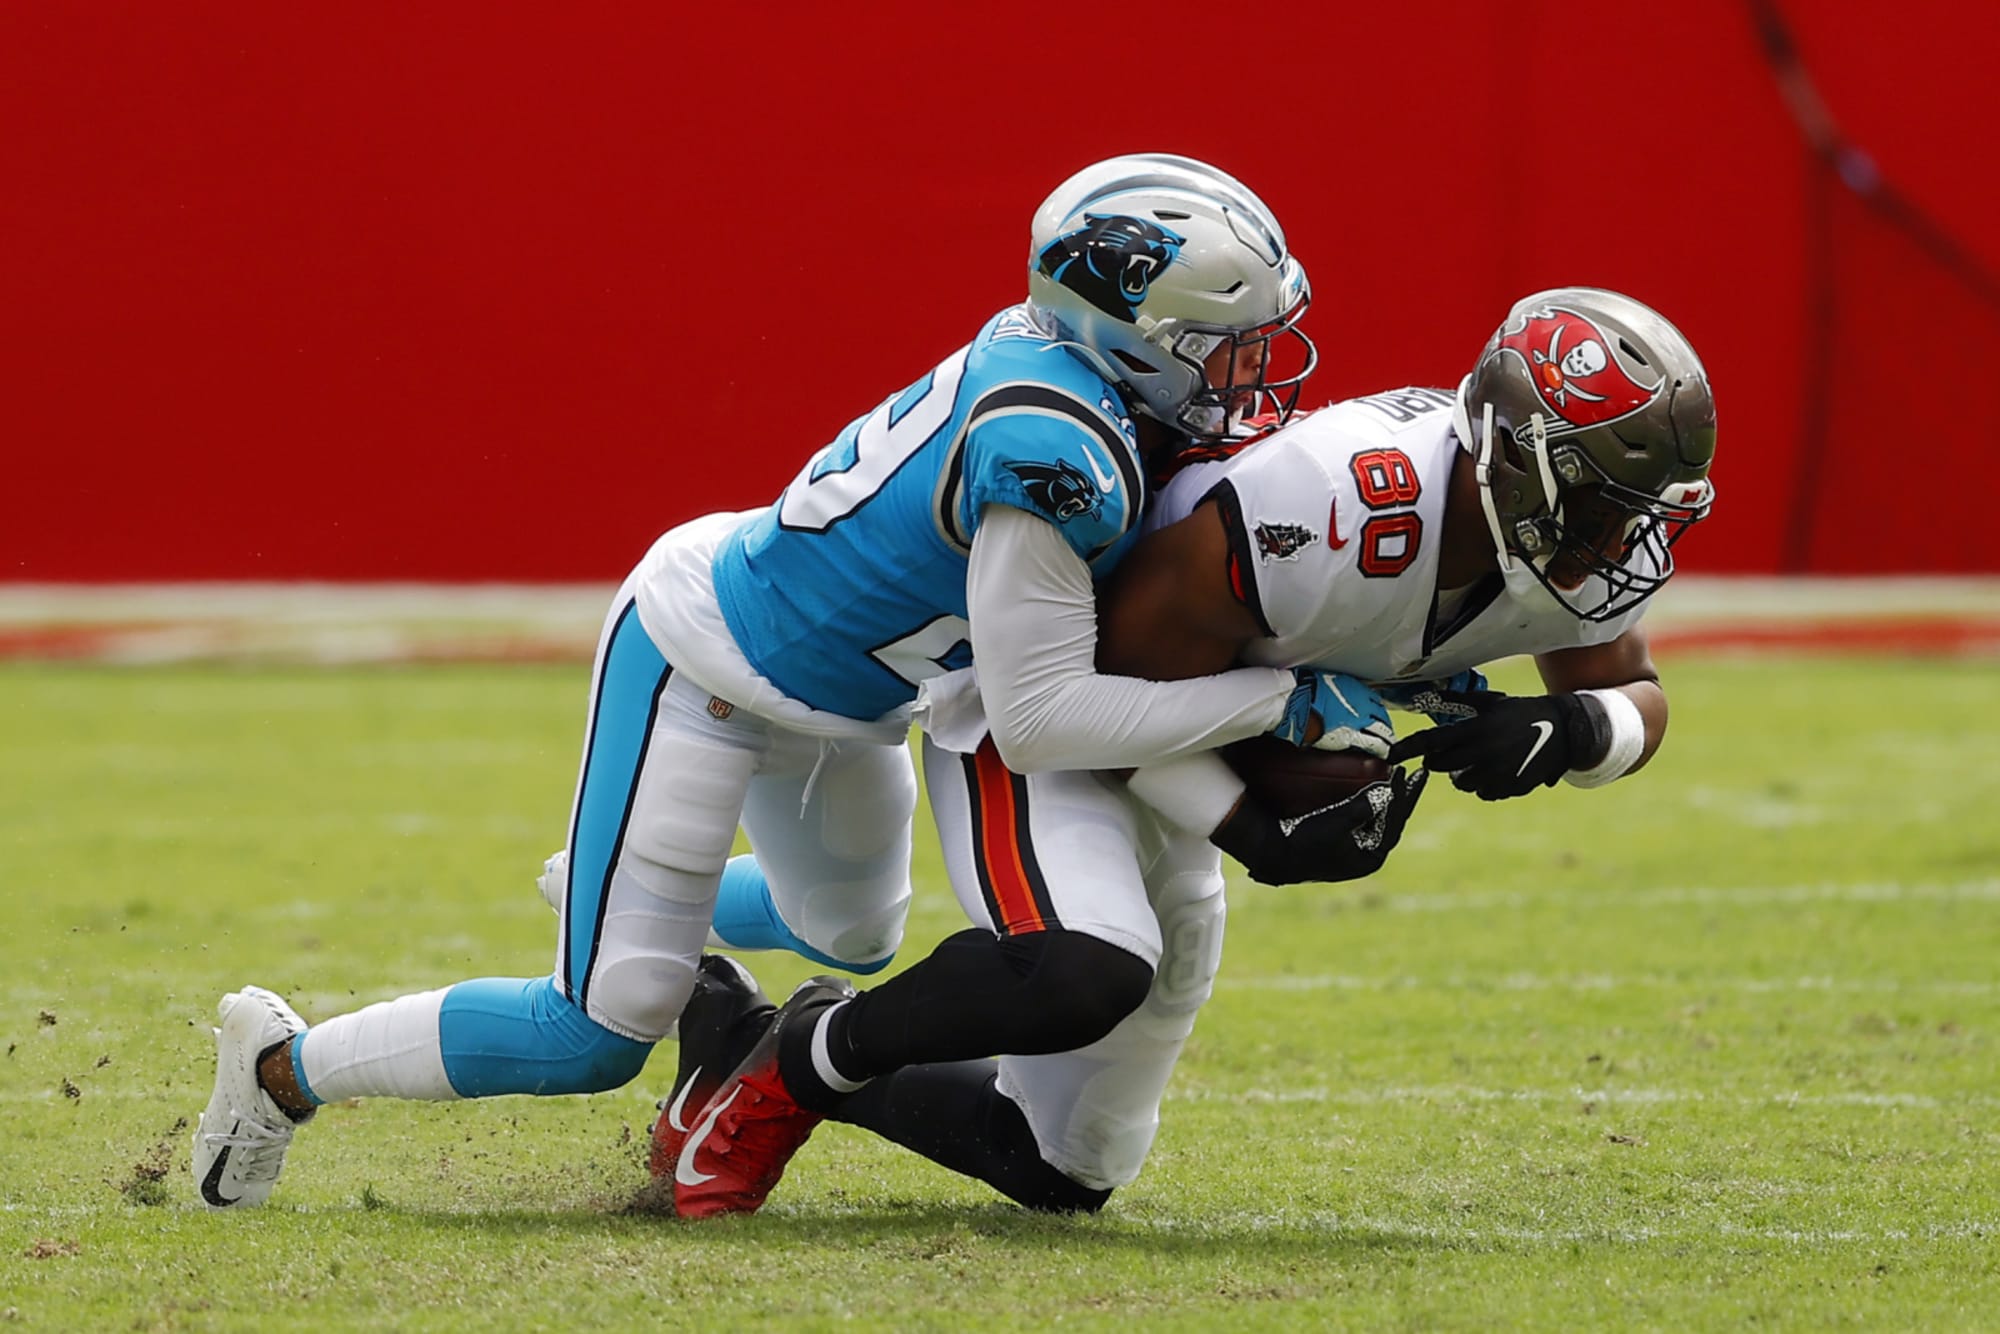 Tampa Bay Buccaneers: Will they be better or worse this year?